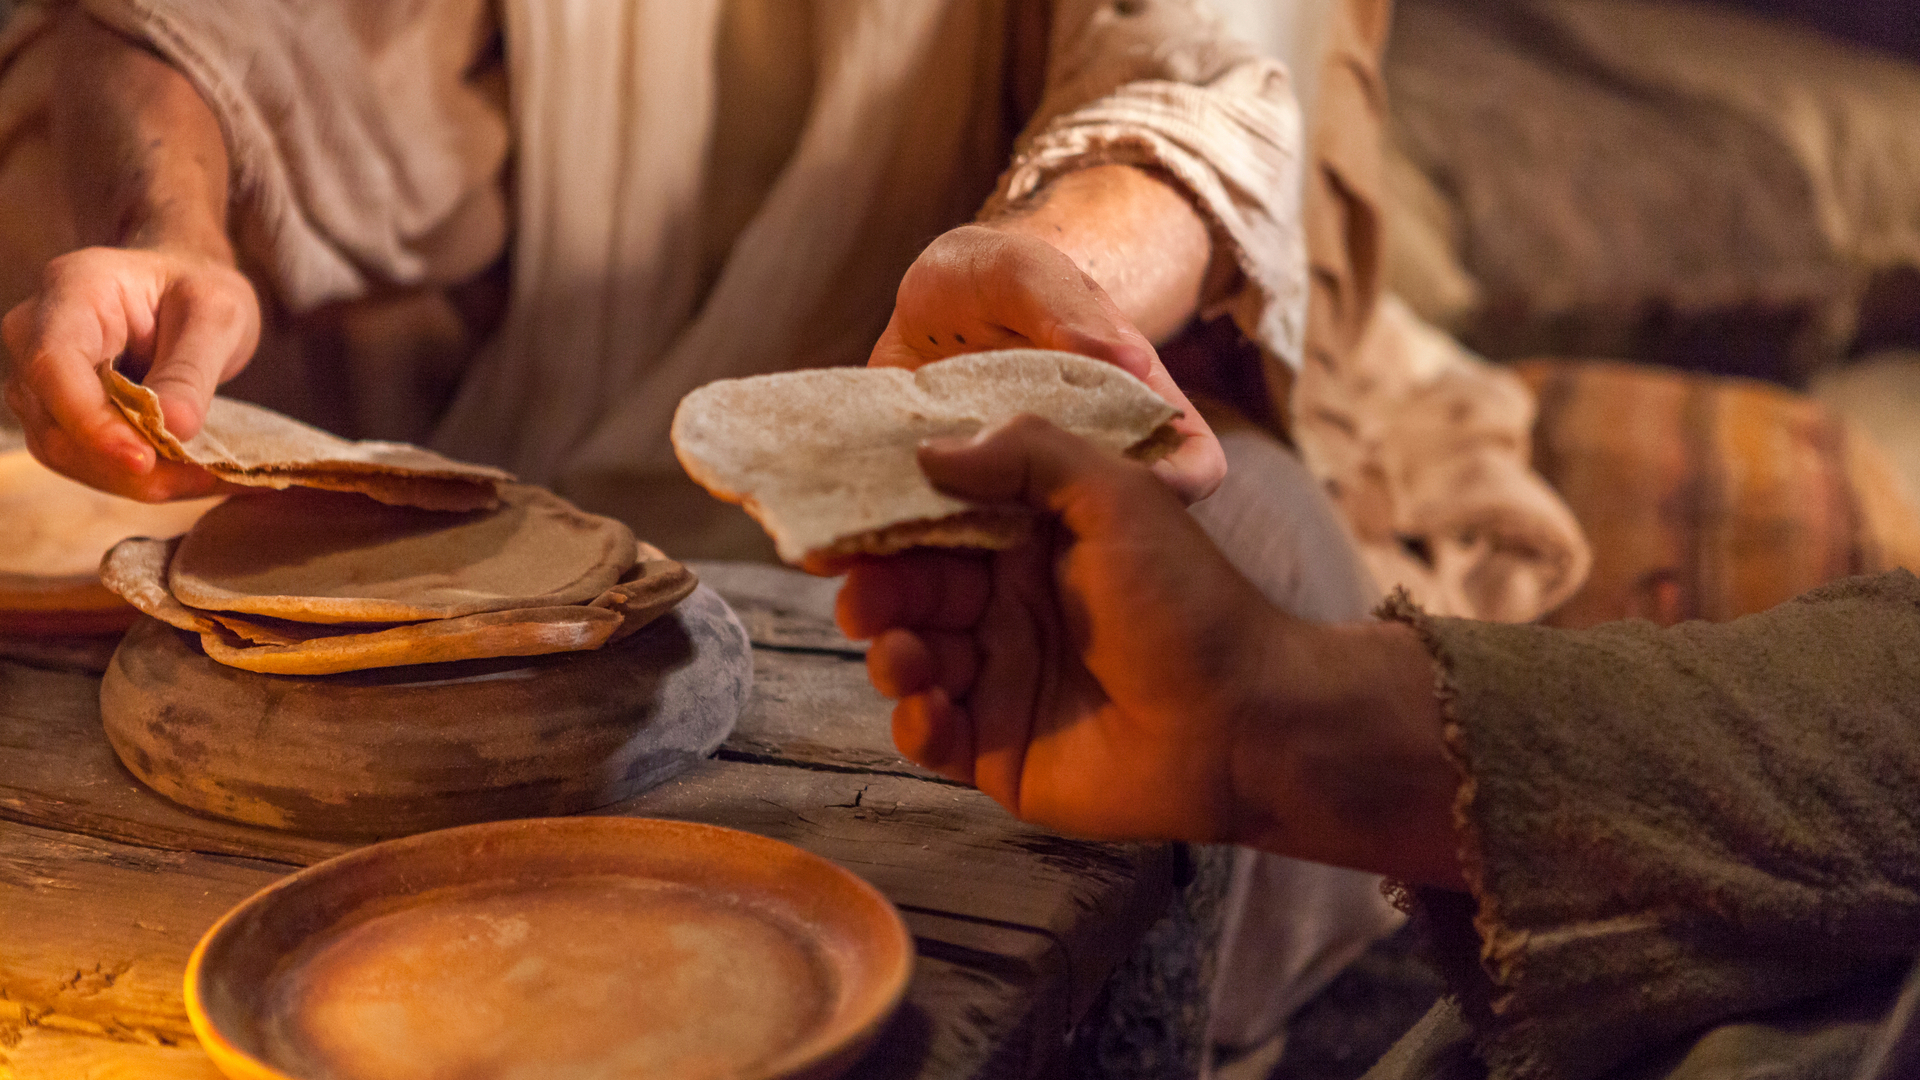 A person breaks bread and hands it to someone. Bread is one example of Passover imagery Jesus Christ used in his "Bread of Life" sermon.